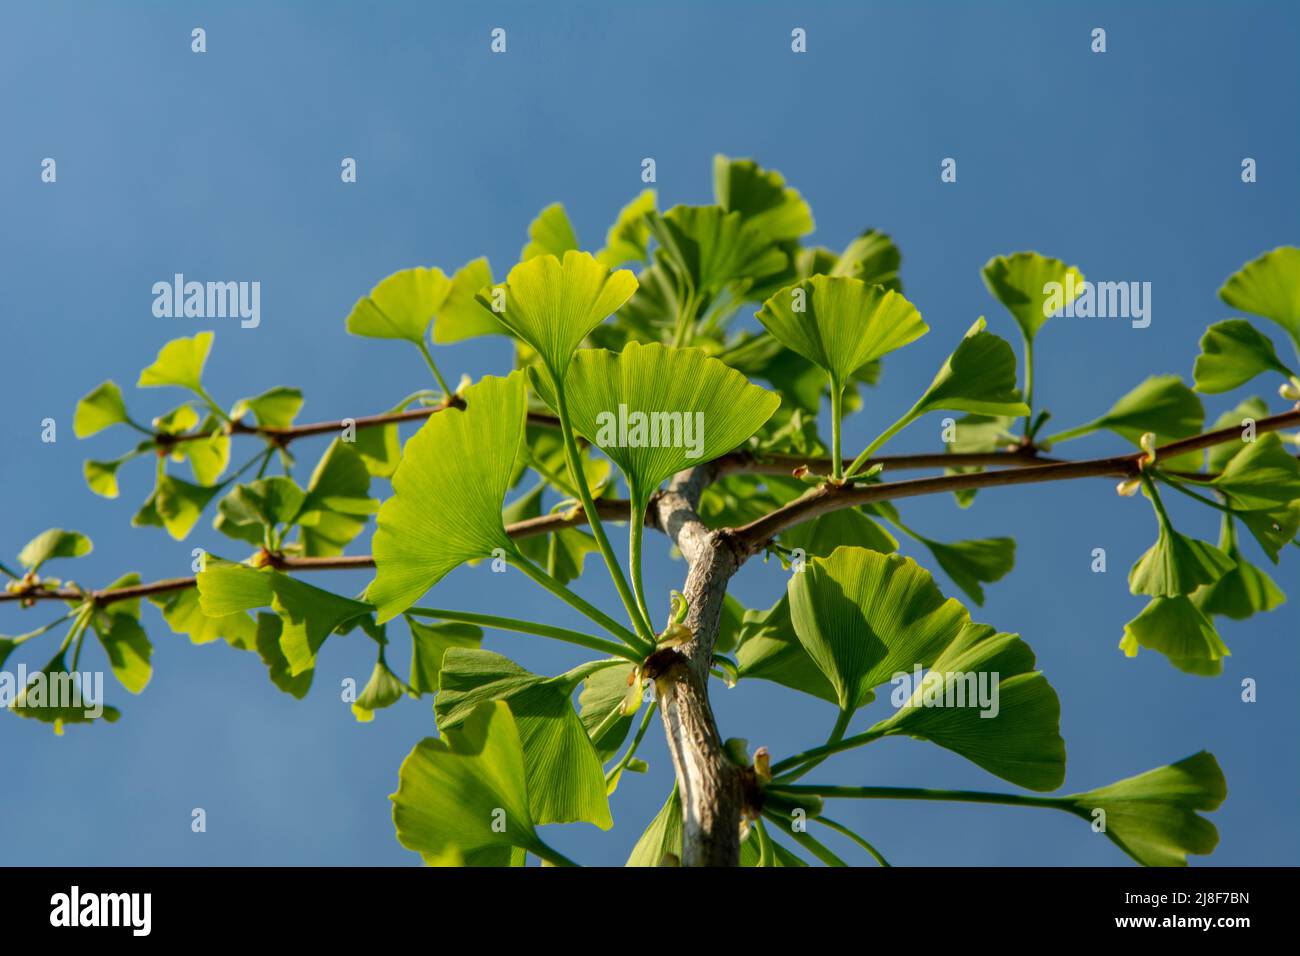 The fan shaped green leaves of Ginkgo biloba tree also known as Maidenhair tree. Budding leaves in the springtime. Stock Photo